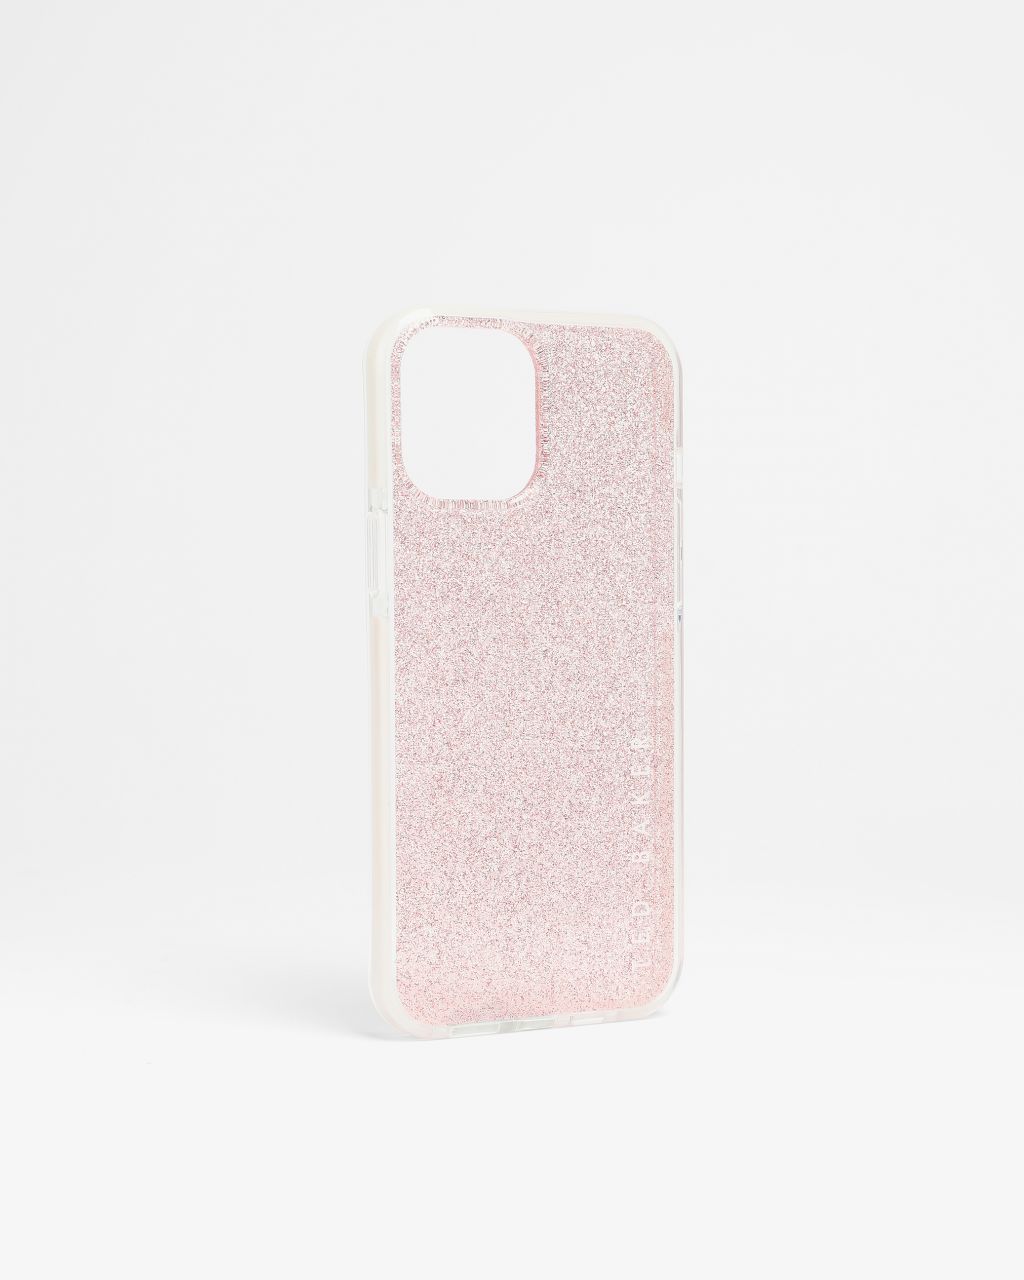 Ted Baker Women's Glitter Antishock Iphone 12 Pro Max Case in Baby Pink, Rossiy